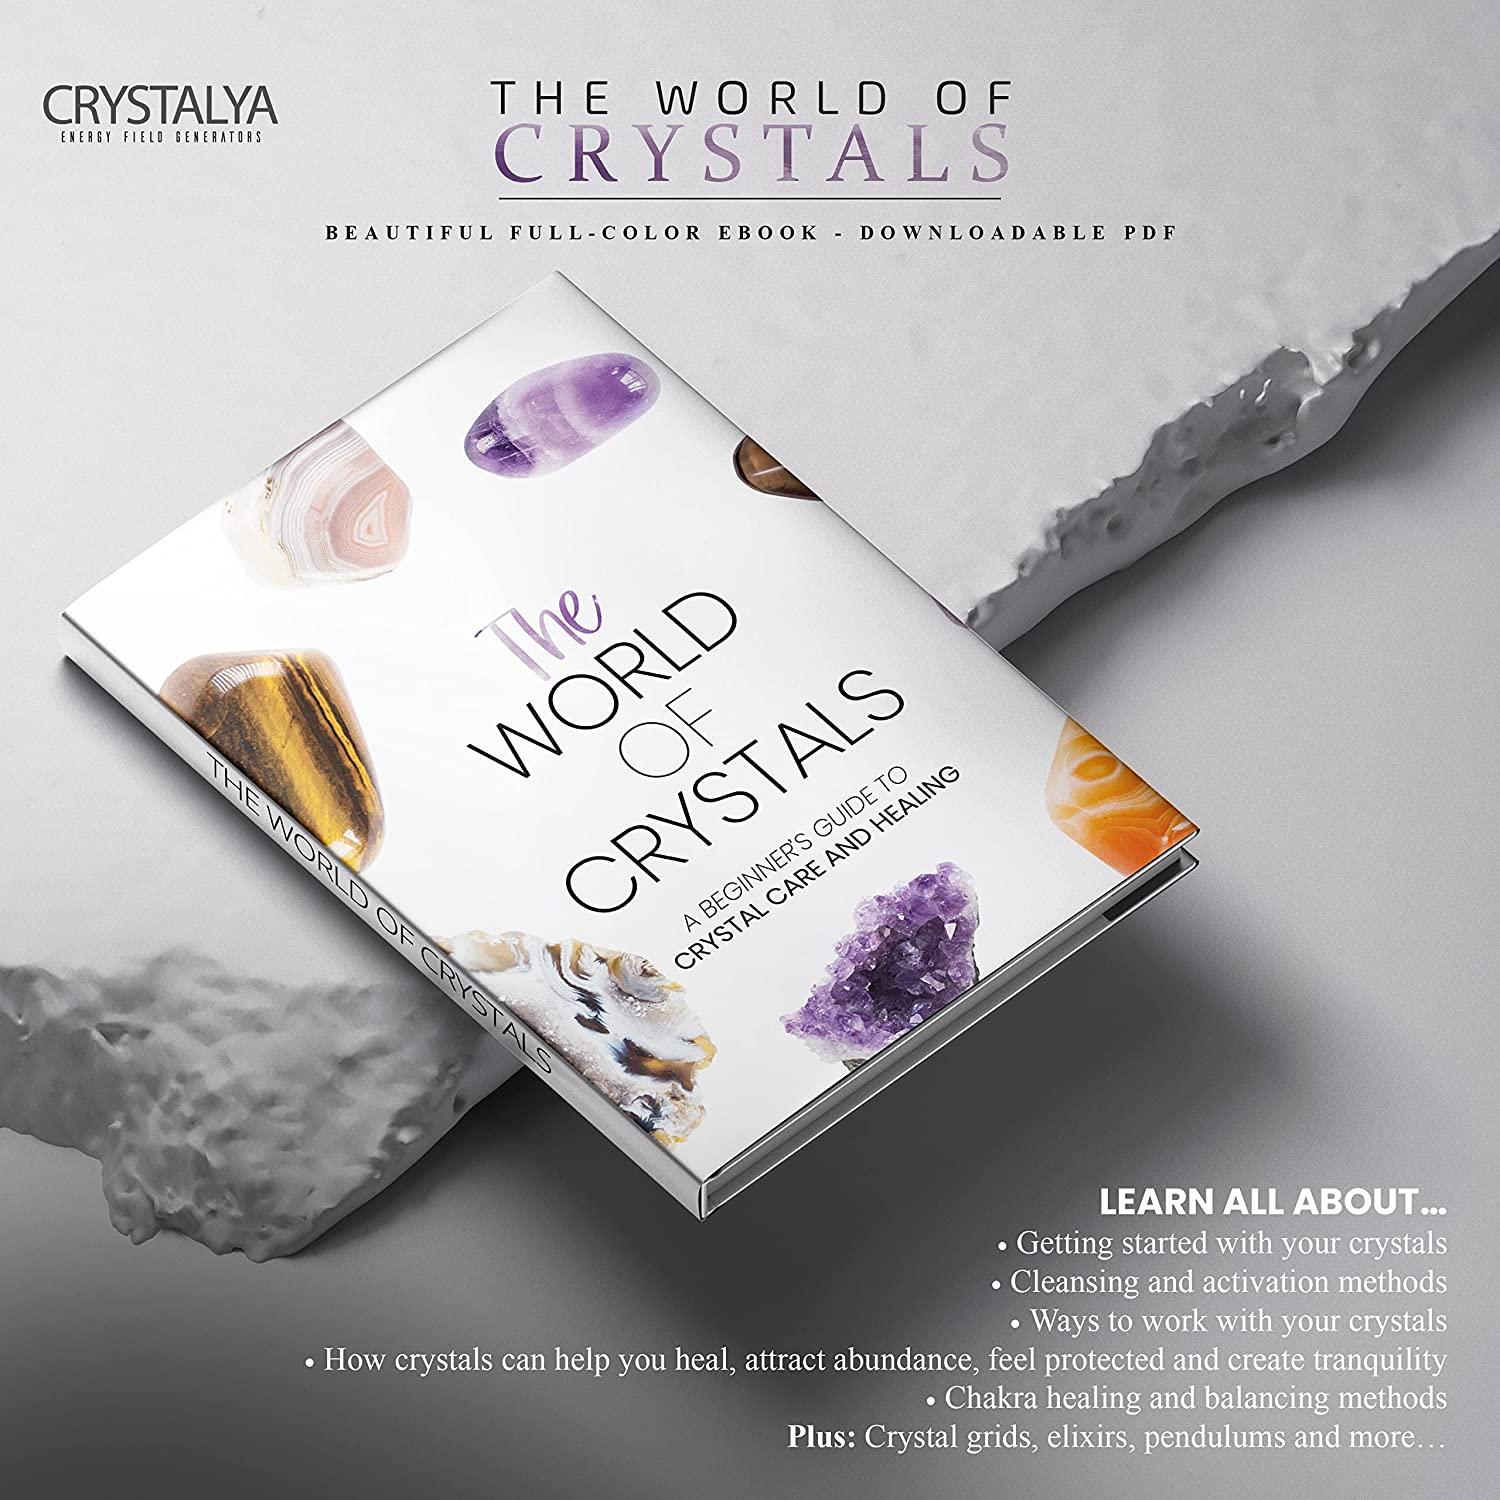  CRYSTALYA Large Premium Crystals and Healing Stones in Wooden  Gift Box + 50pg EBOOK – 7 Chakra Tumbled Gemstones, Amethyst Crystal, Rose  Quartz, Quartz Crystal Point, and Info Guide, Made in